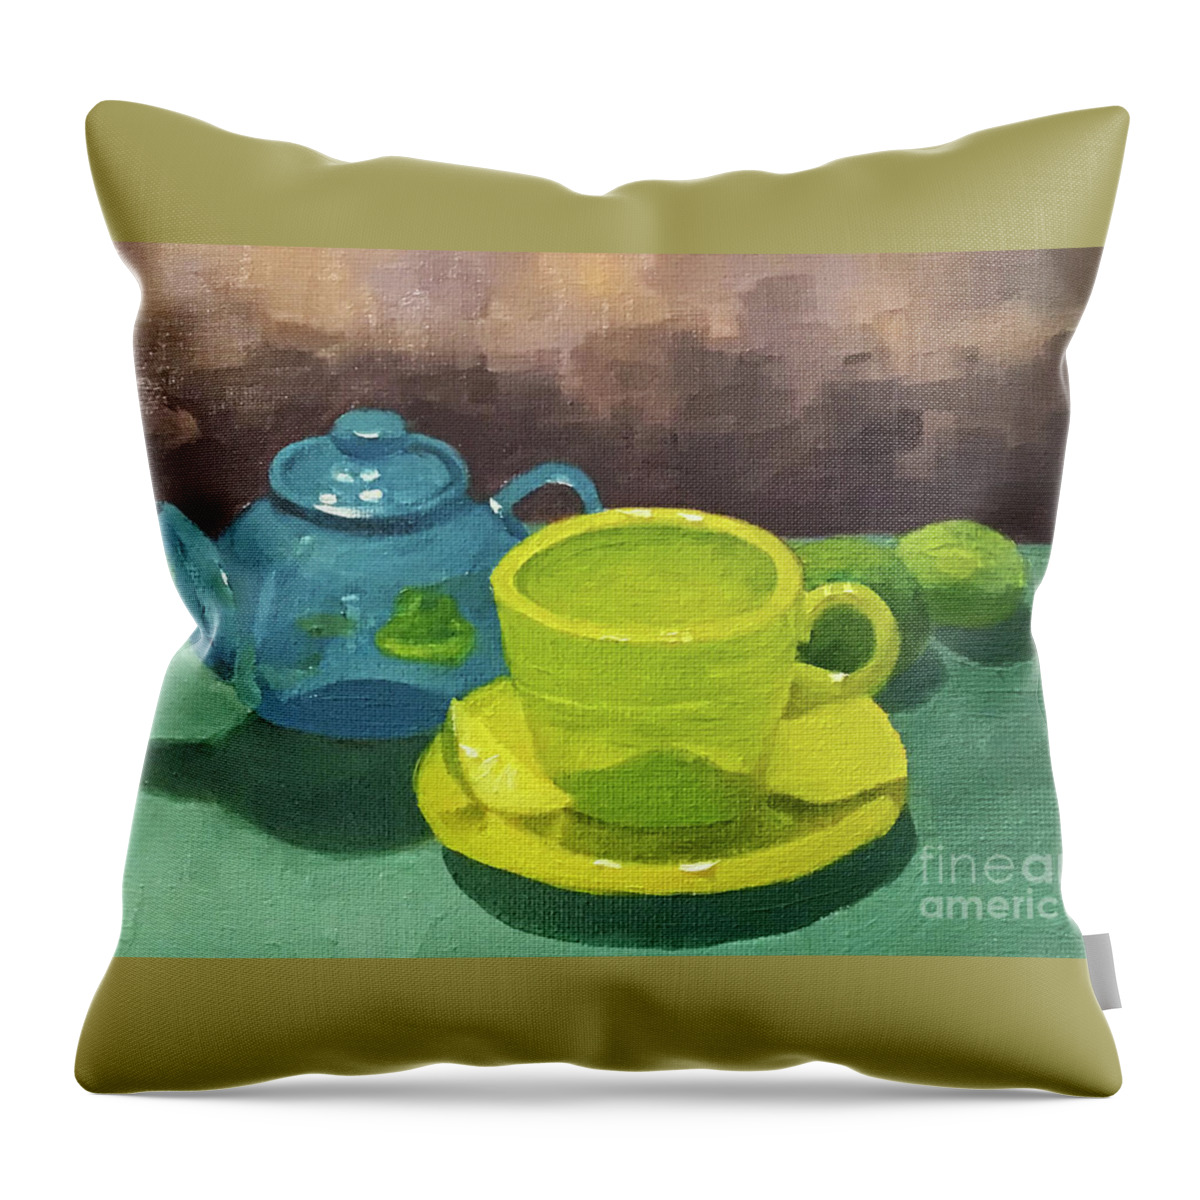 Teapot Throw Pillow featuring the painting Lil' Blue Teapot by Anne Marie Brown